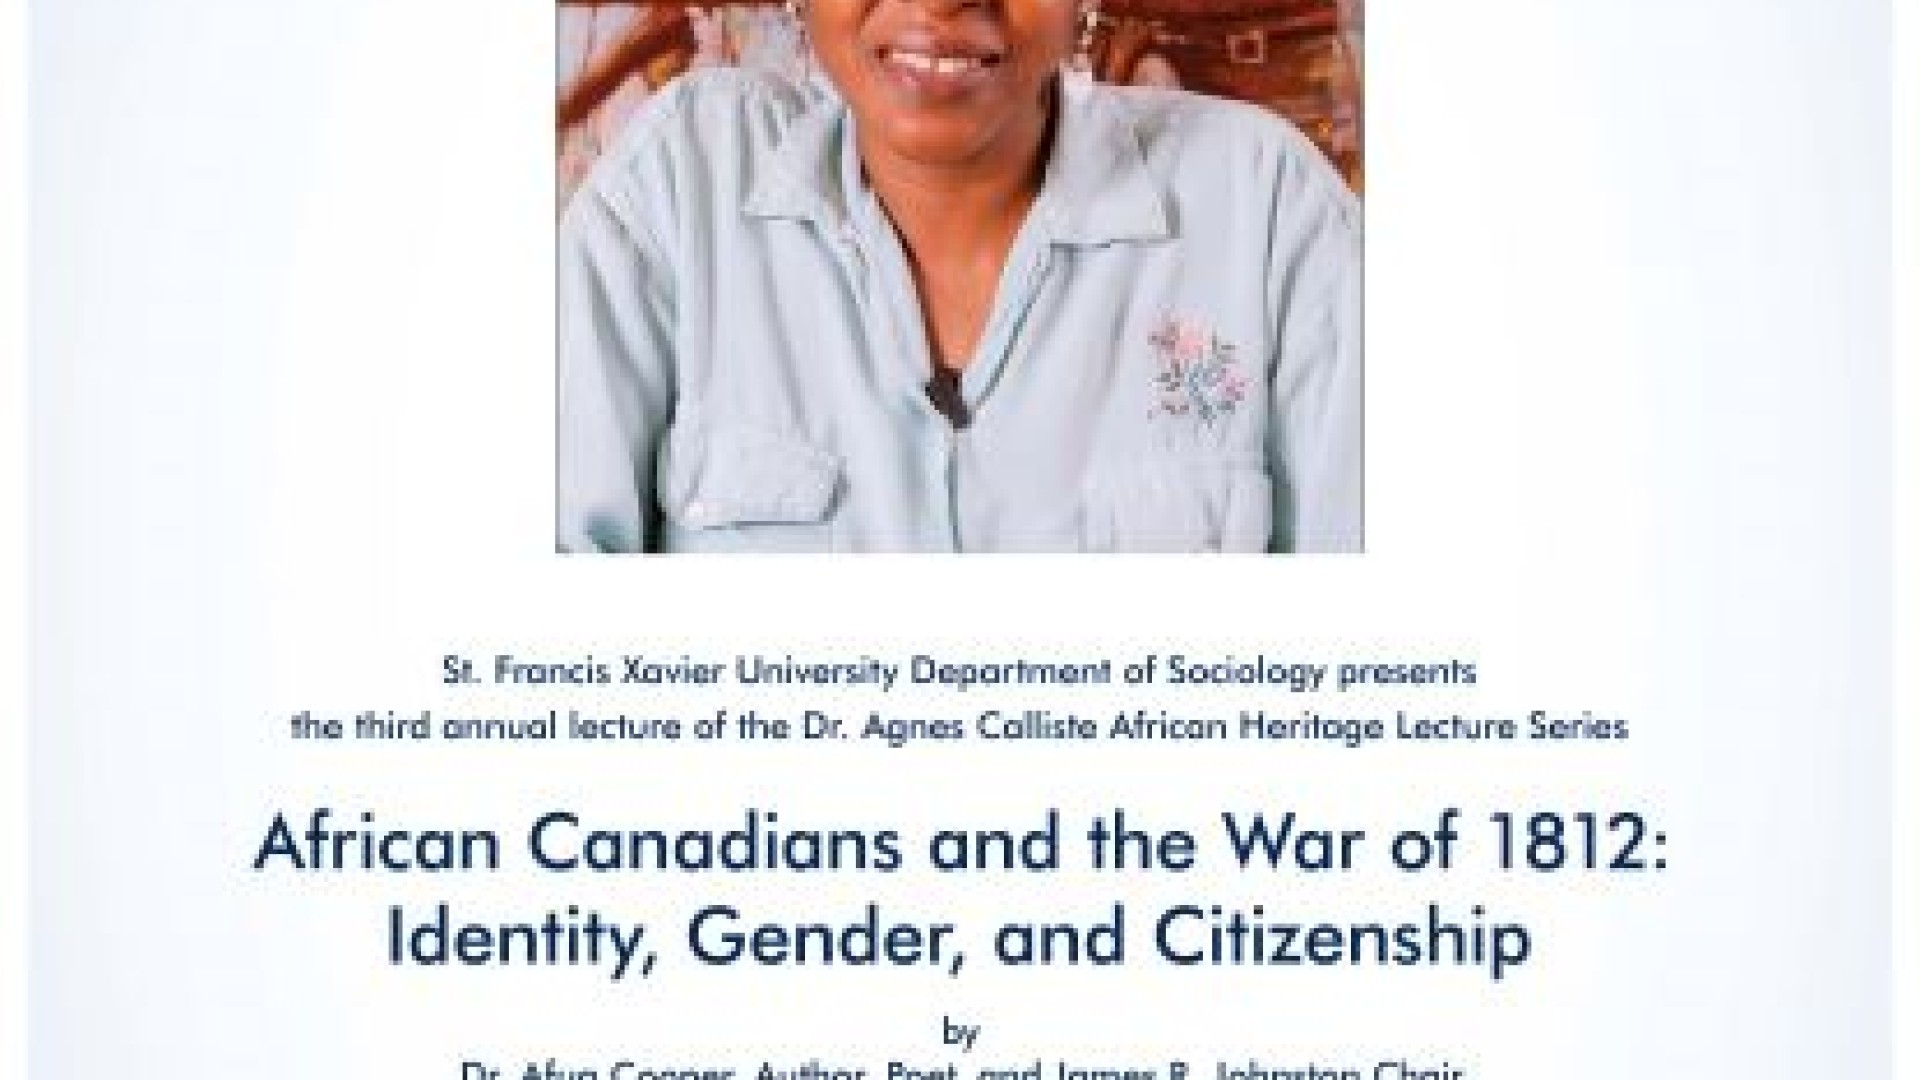 Poster: African Canadians and the War of 1812: Identify, Gender, and Citizenship featuring Dr. Afua Cooper